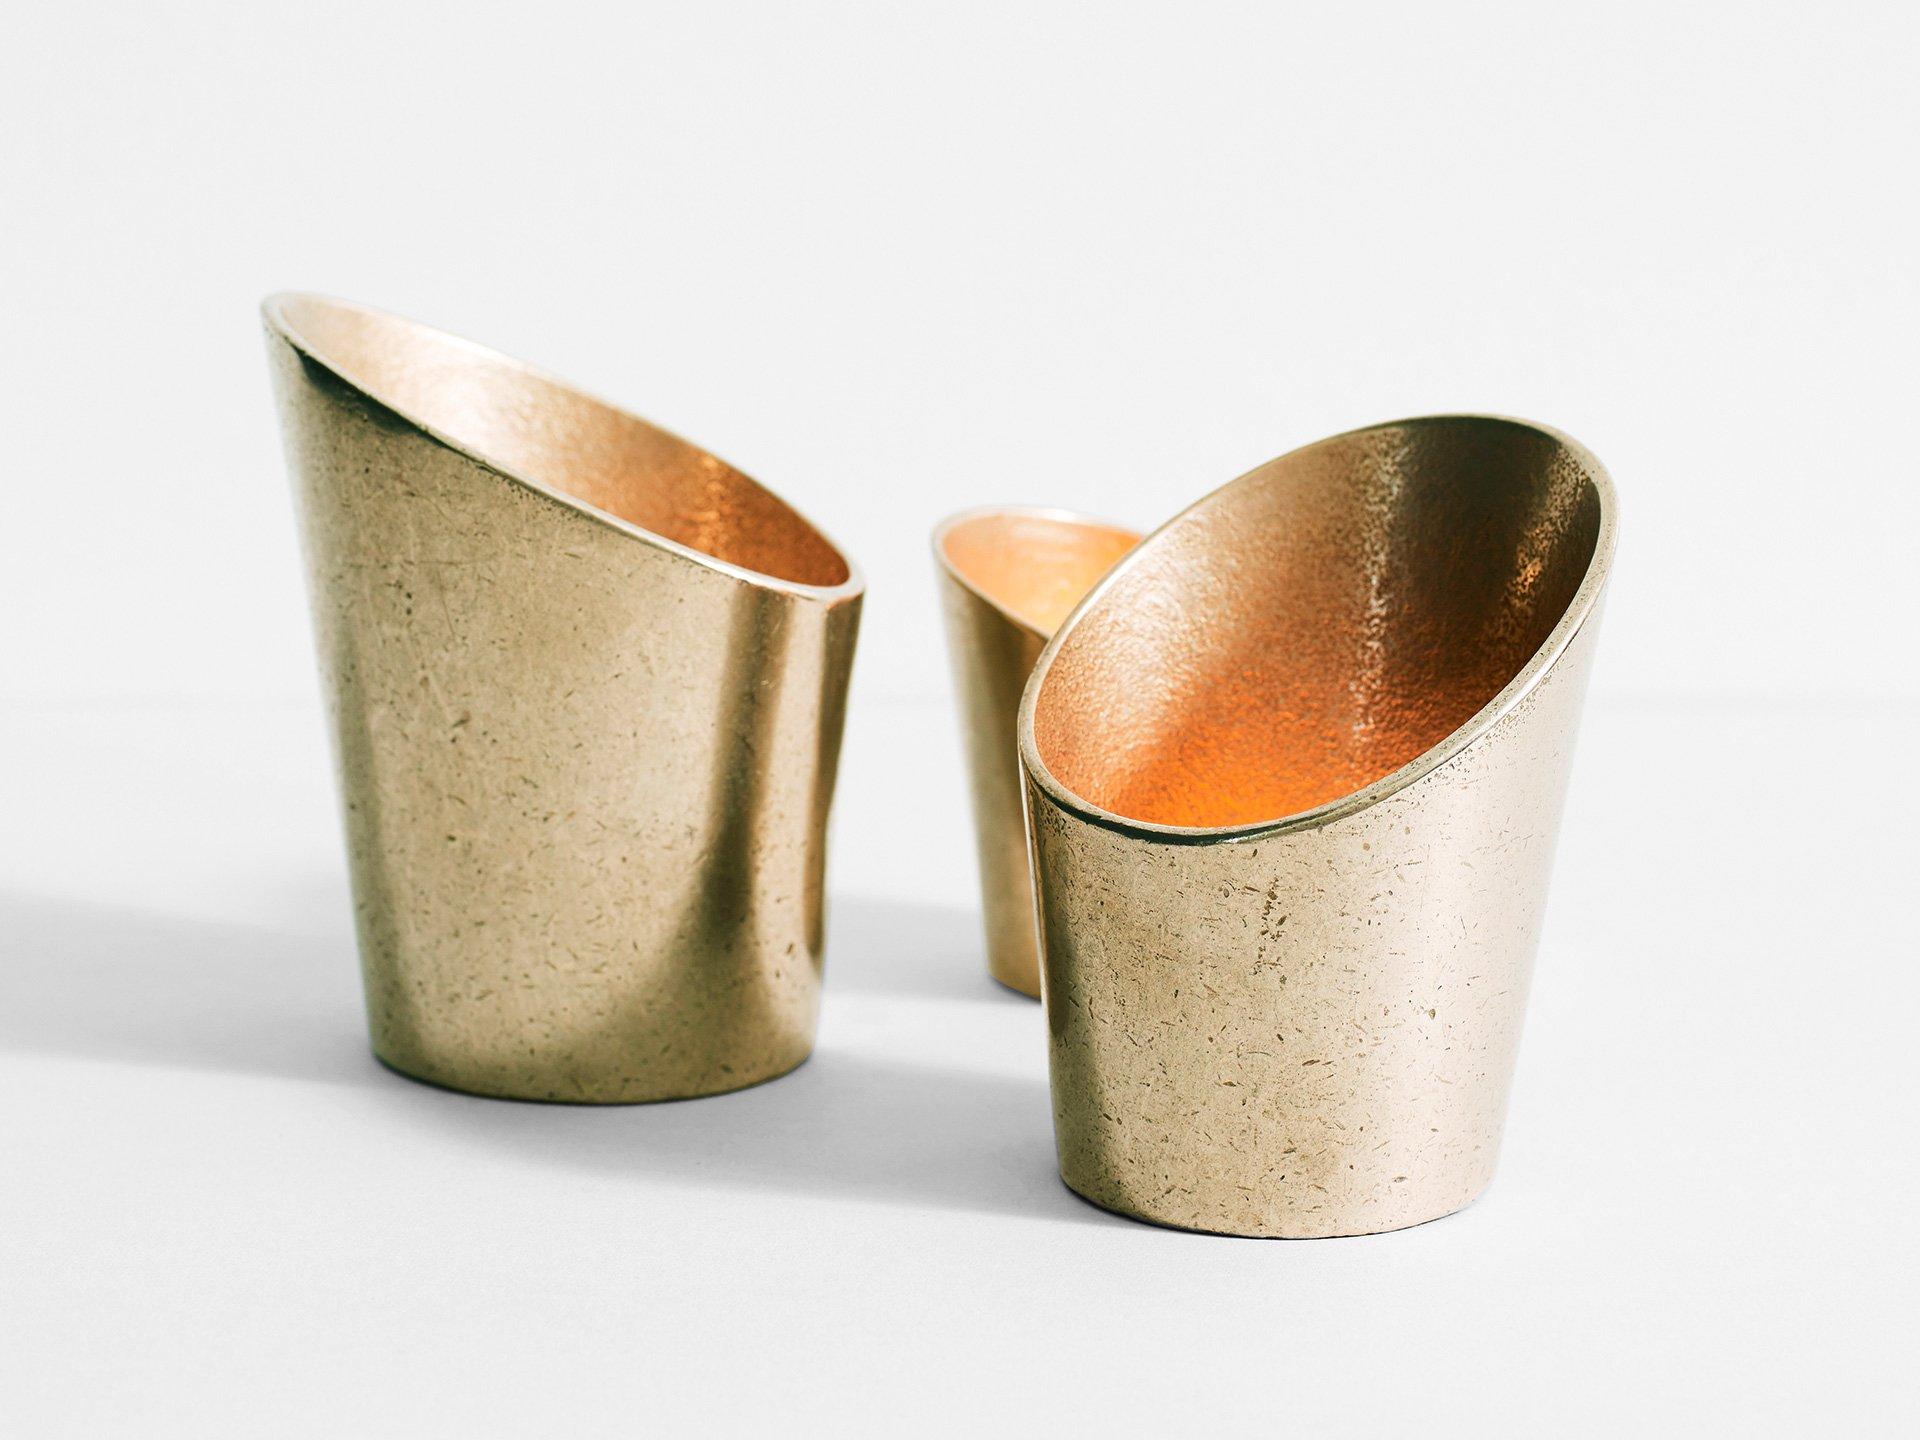 Sheath Tealight holders - Henry Wilson

The Sheath Tealight holders utilise the reflectivity of soid brass to create a warm atmospheric glow. They are designed to suit a standard tealight.

Sheath Tealights are manufactured in small batches so